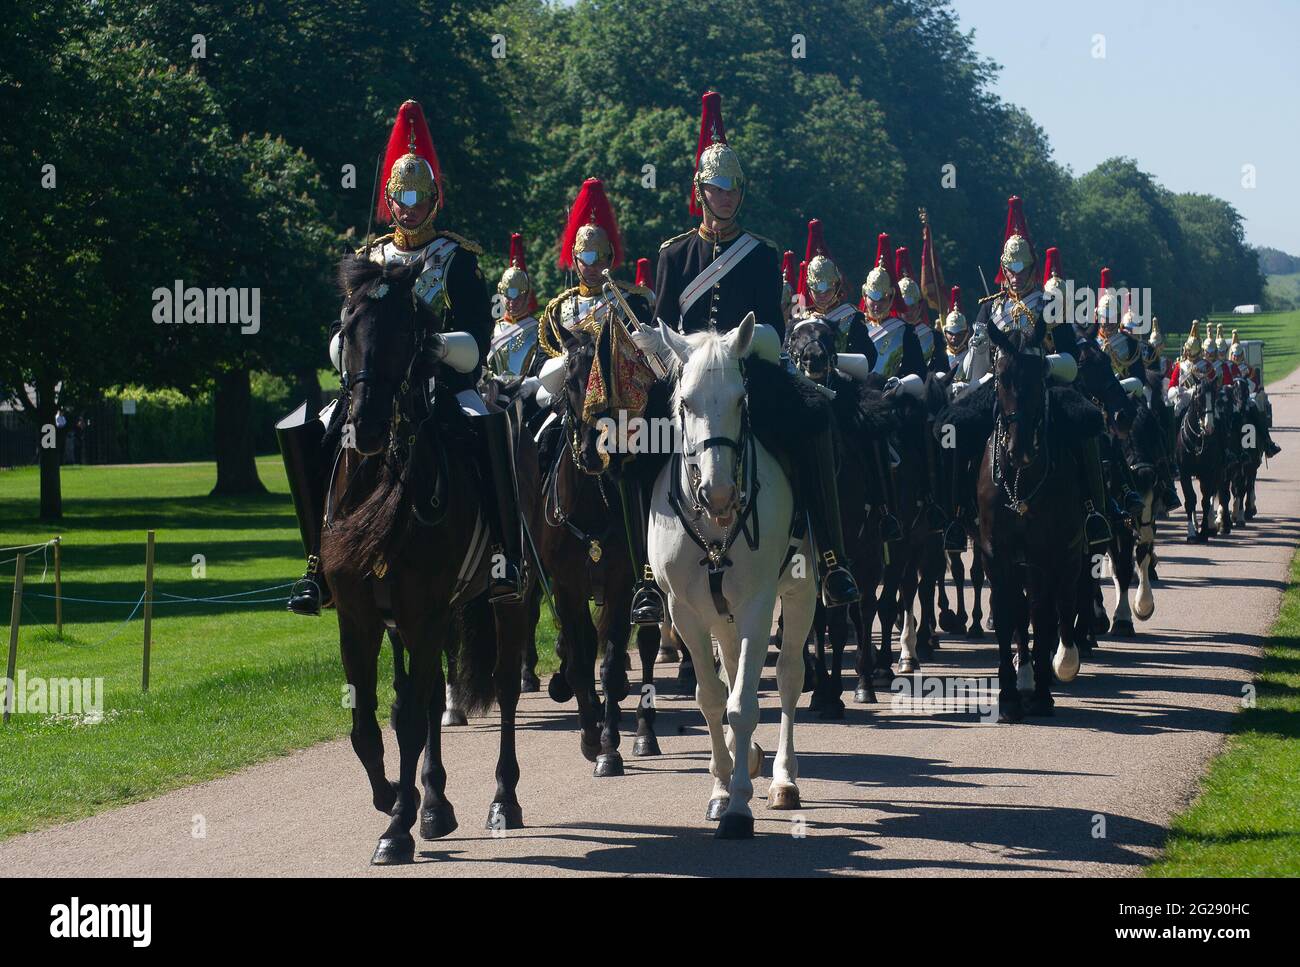 Windsor, Berkshire, UK. 9th June, 2021. The Kings's Royal Horse Artillery and the Household Cavalry Mounted Regiment rode along the Long Walk today as did a full rehearsal for